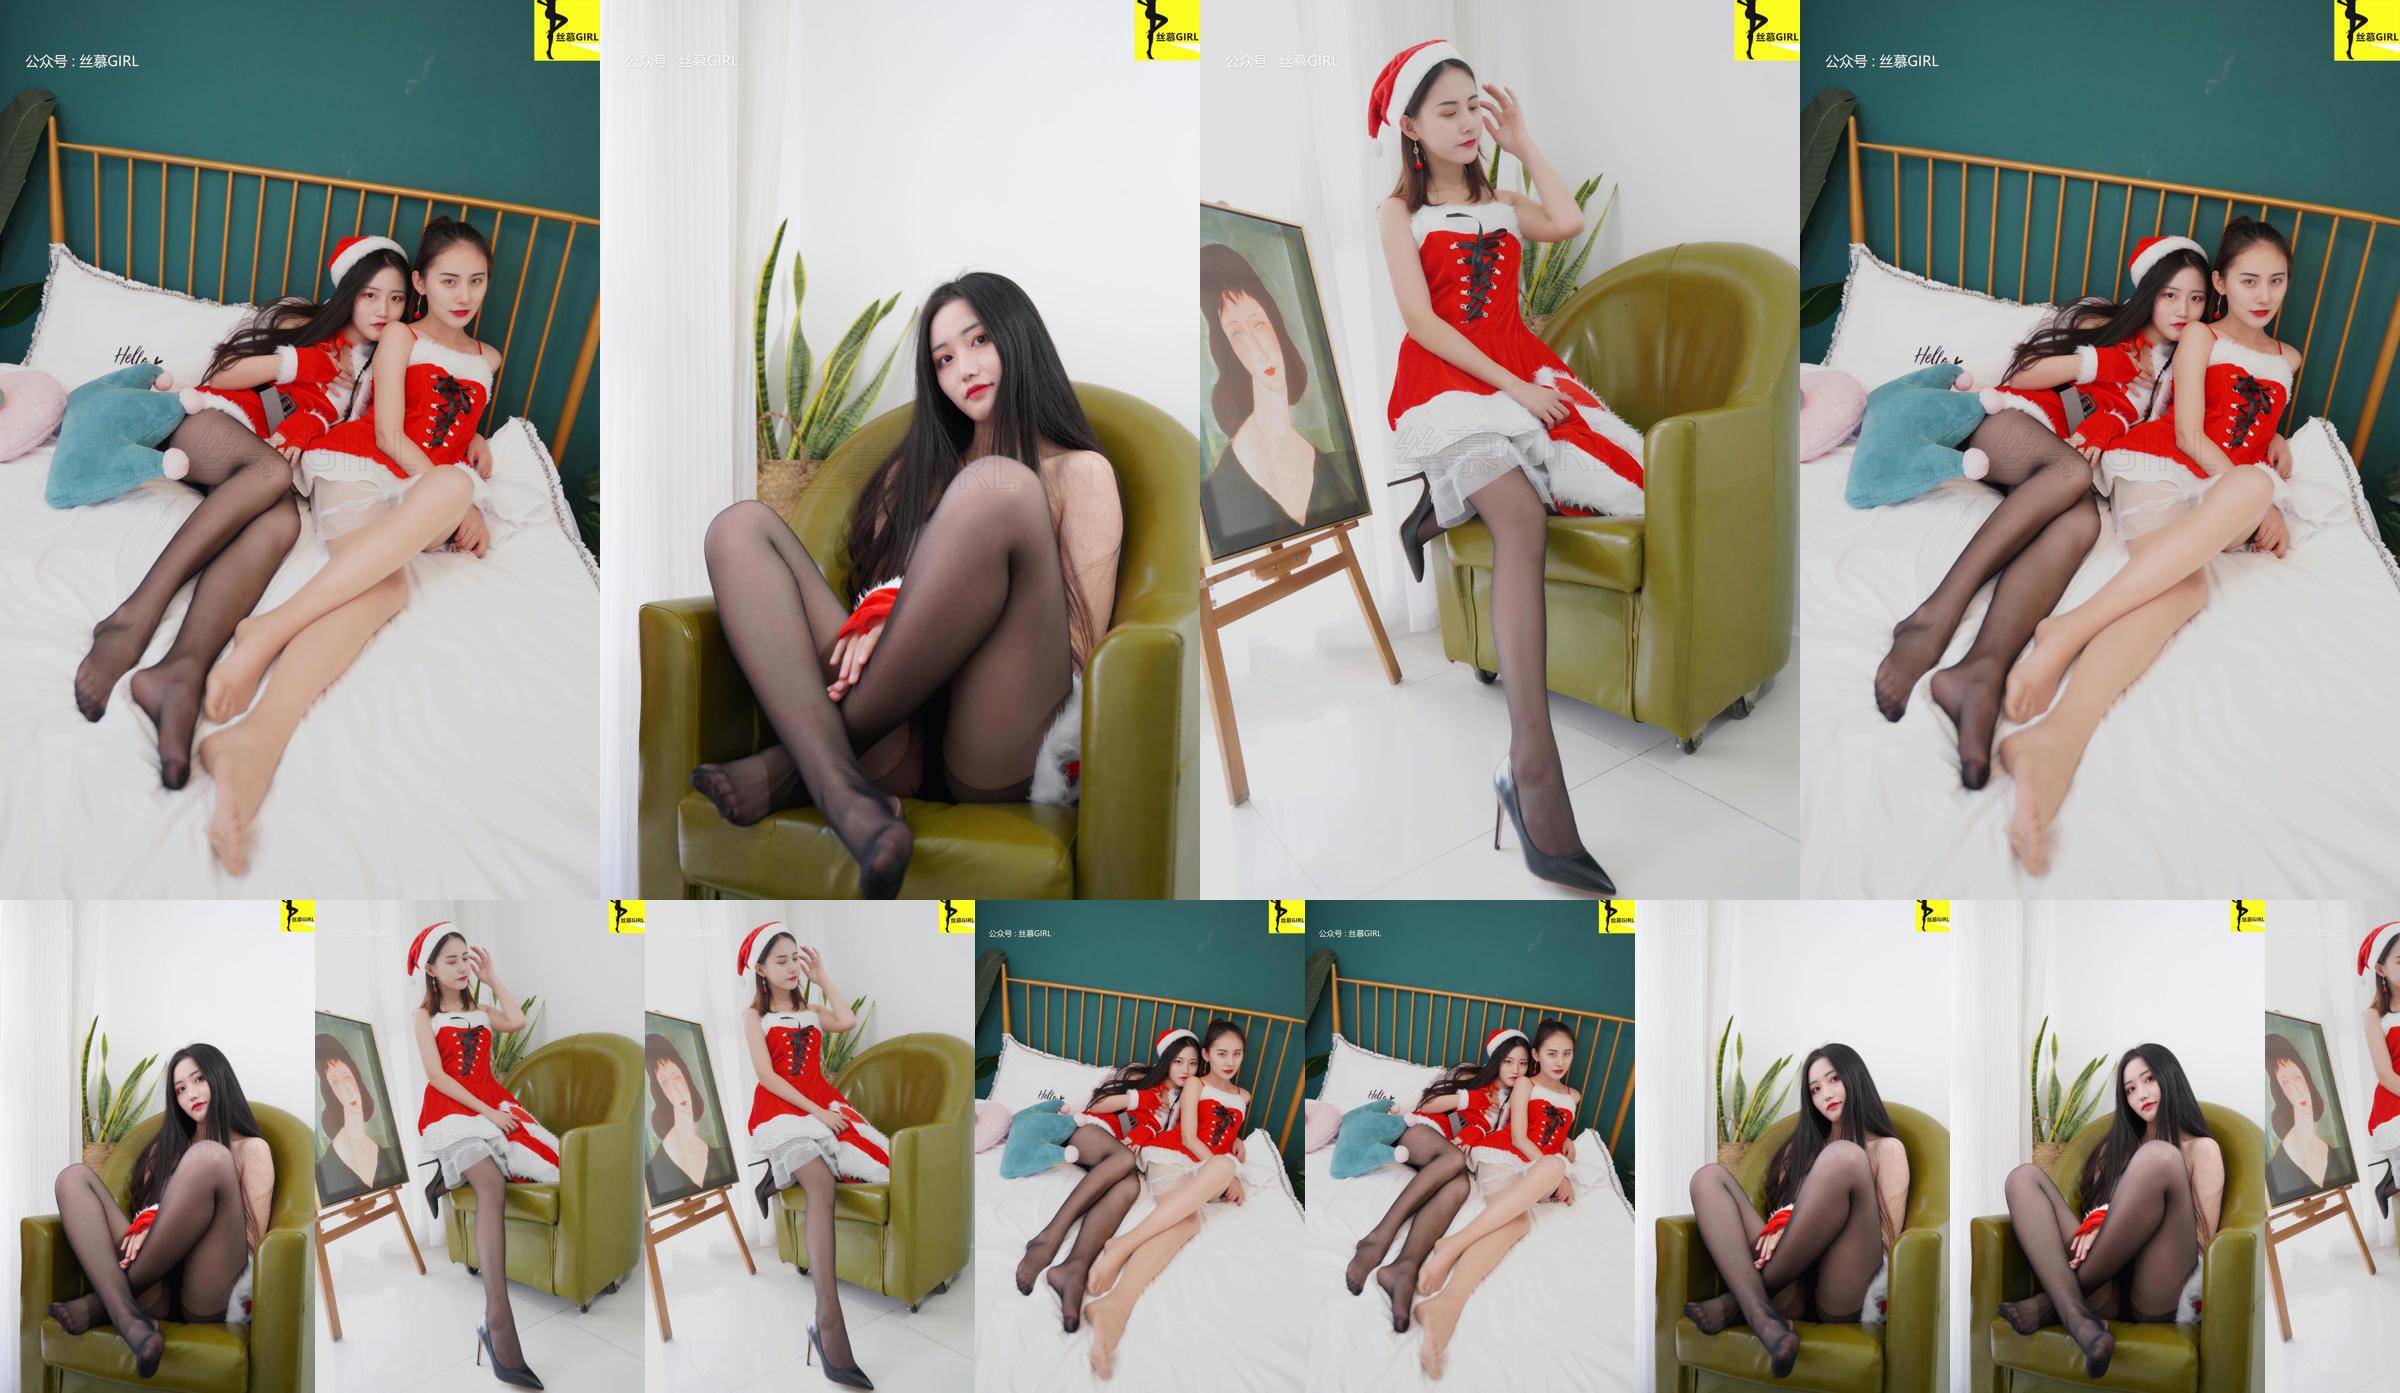 [Simu] Issue 041 Tingyi & Shuangshuang "Christmas Special" No.c80a84 Page 2